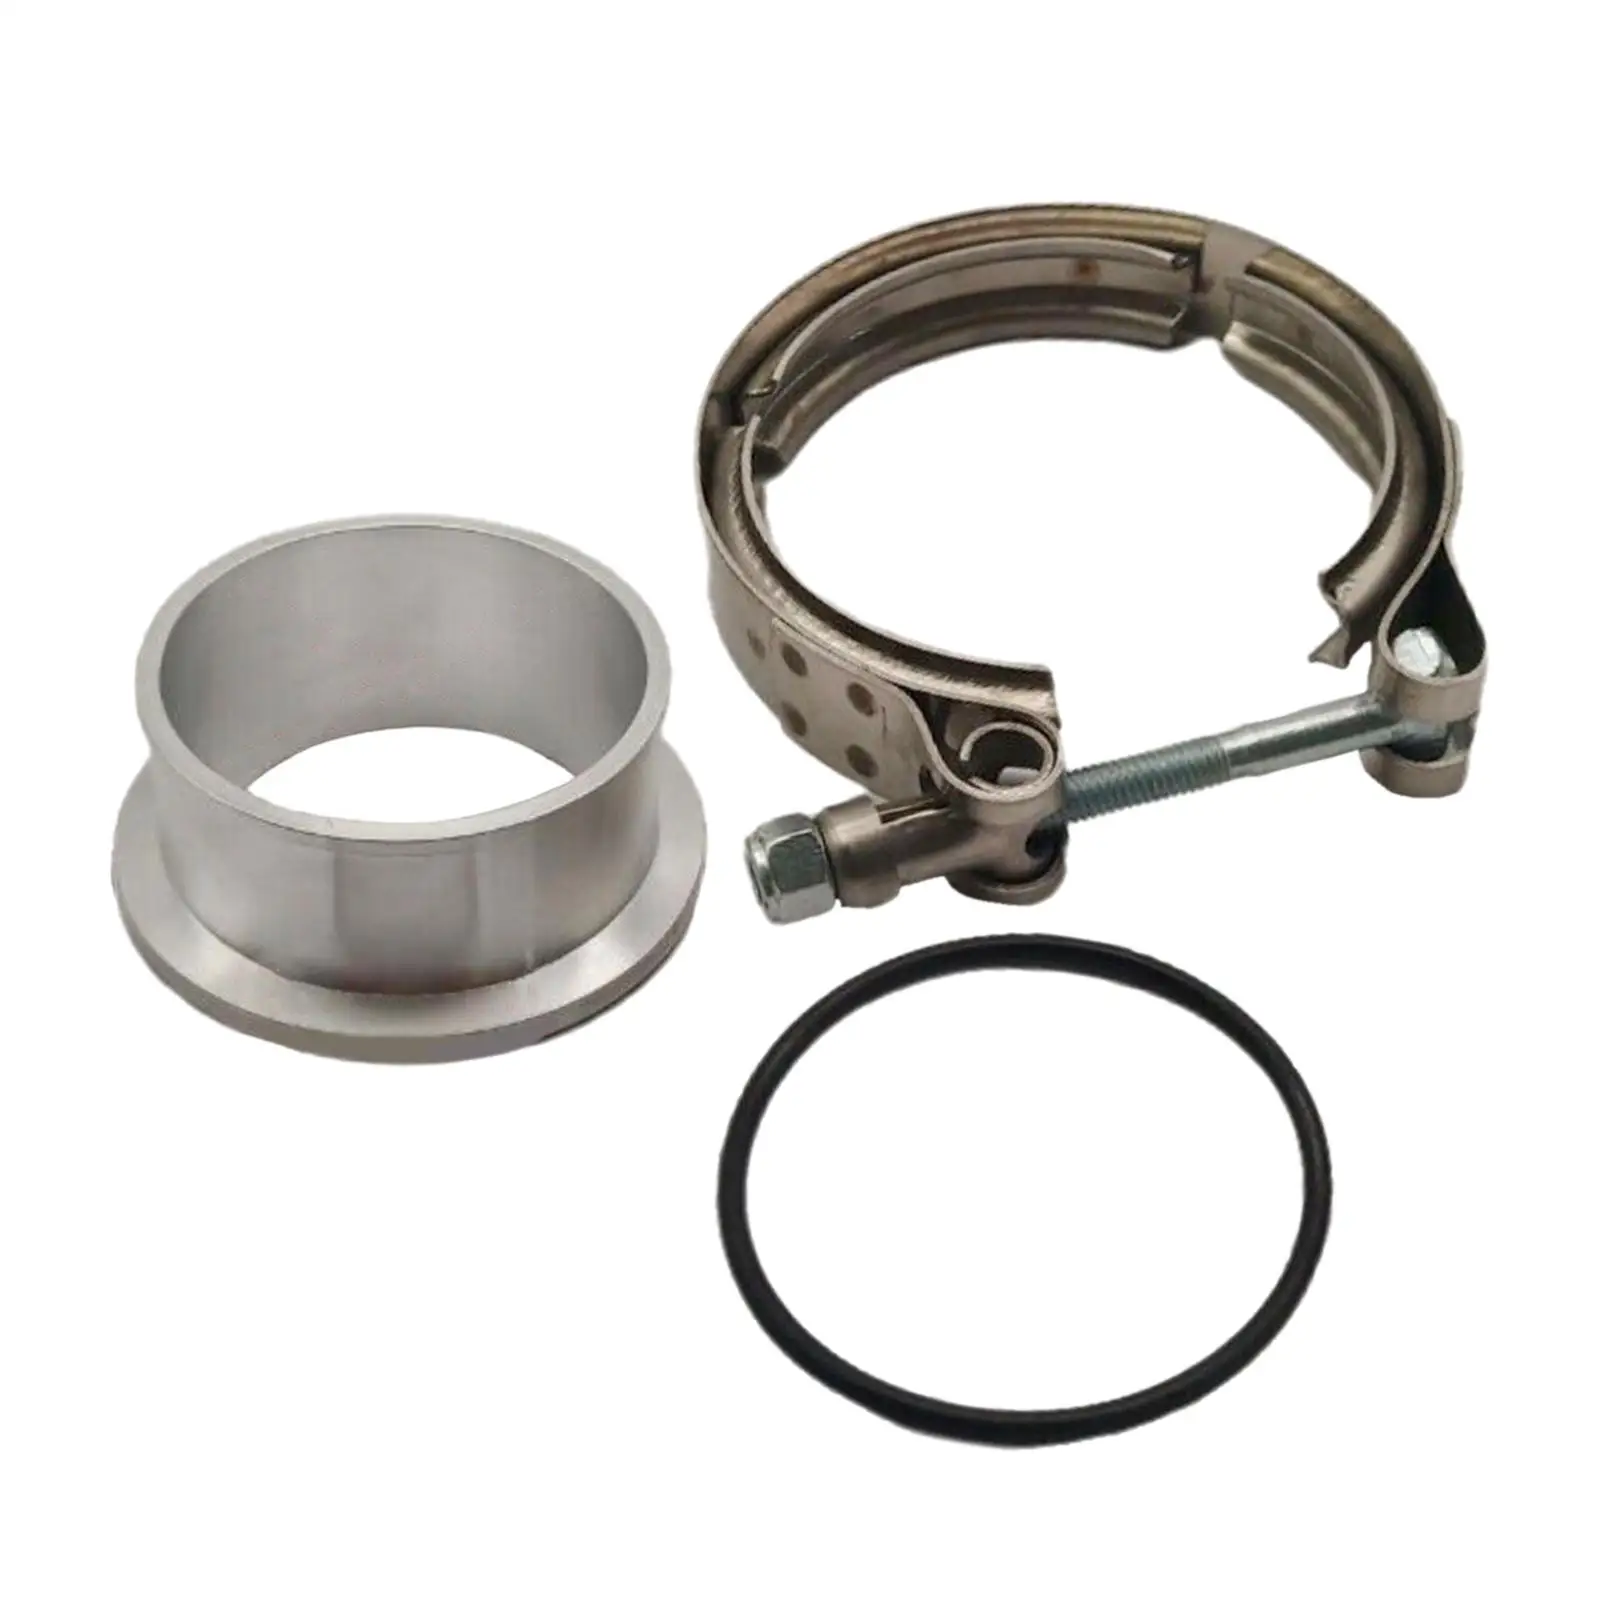 V Band Clamp Turbo Air Transfer Pipe Clamp for Cummins Replacement Tool